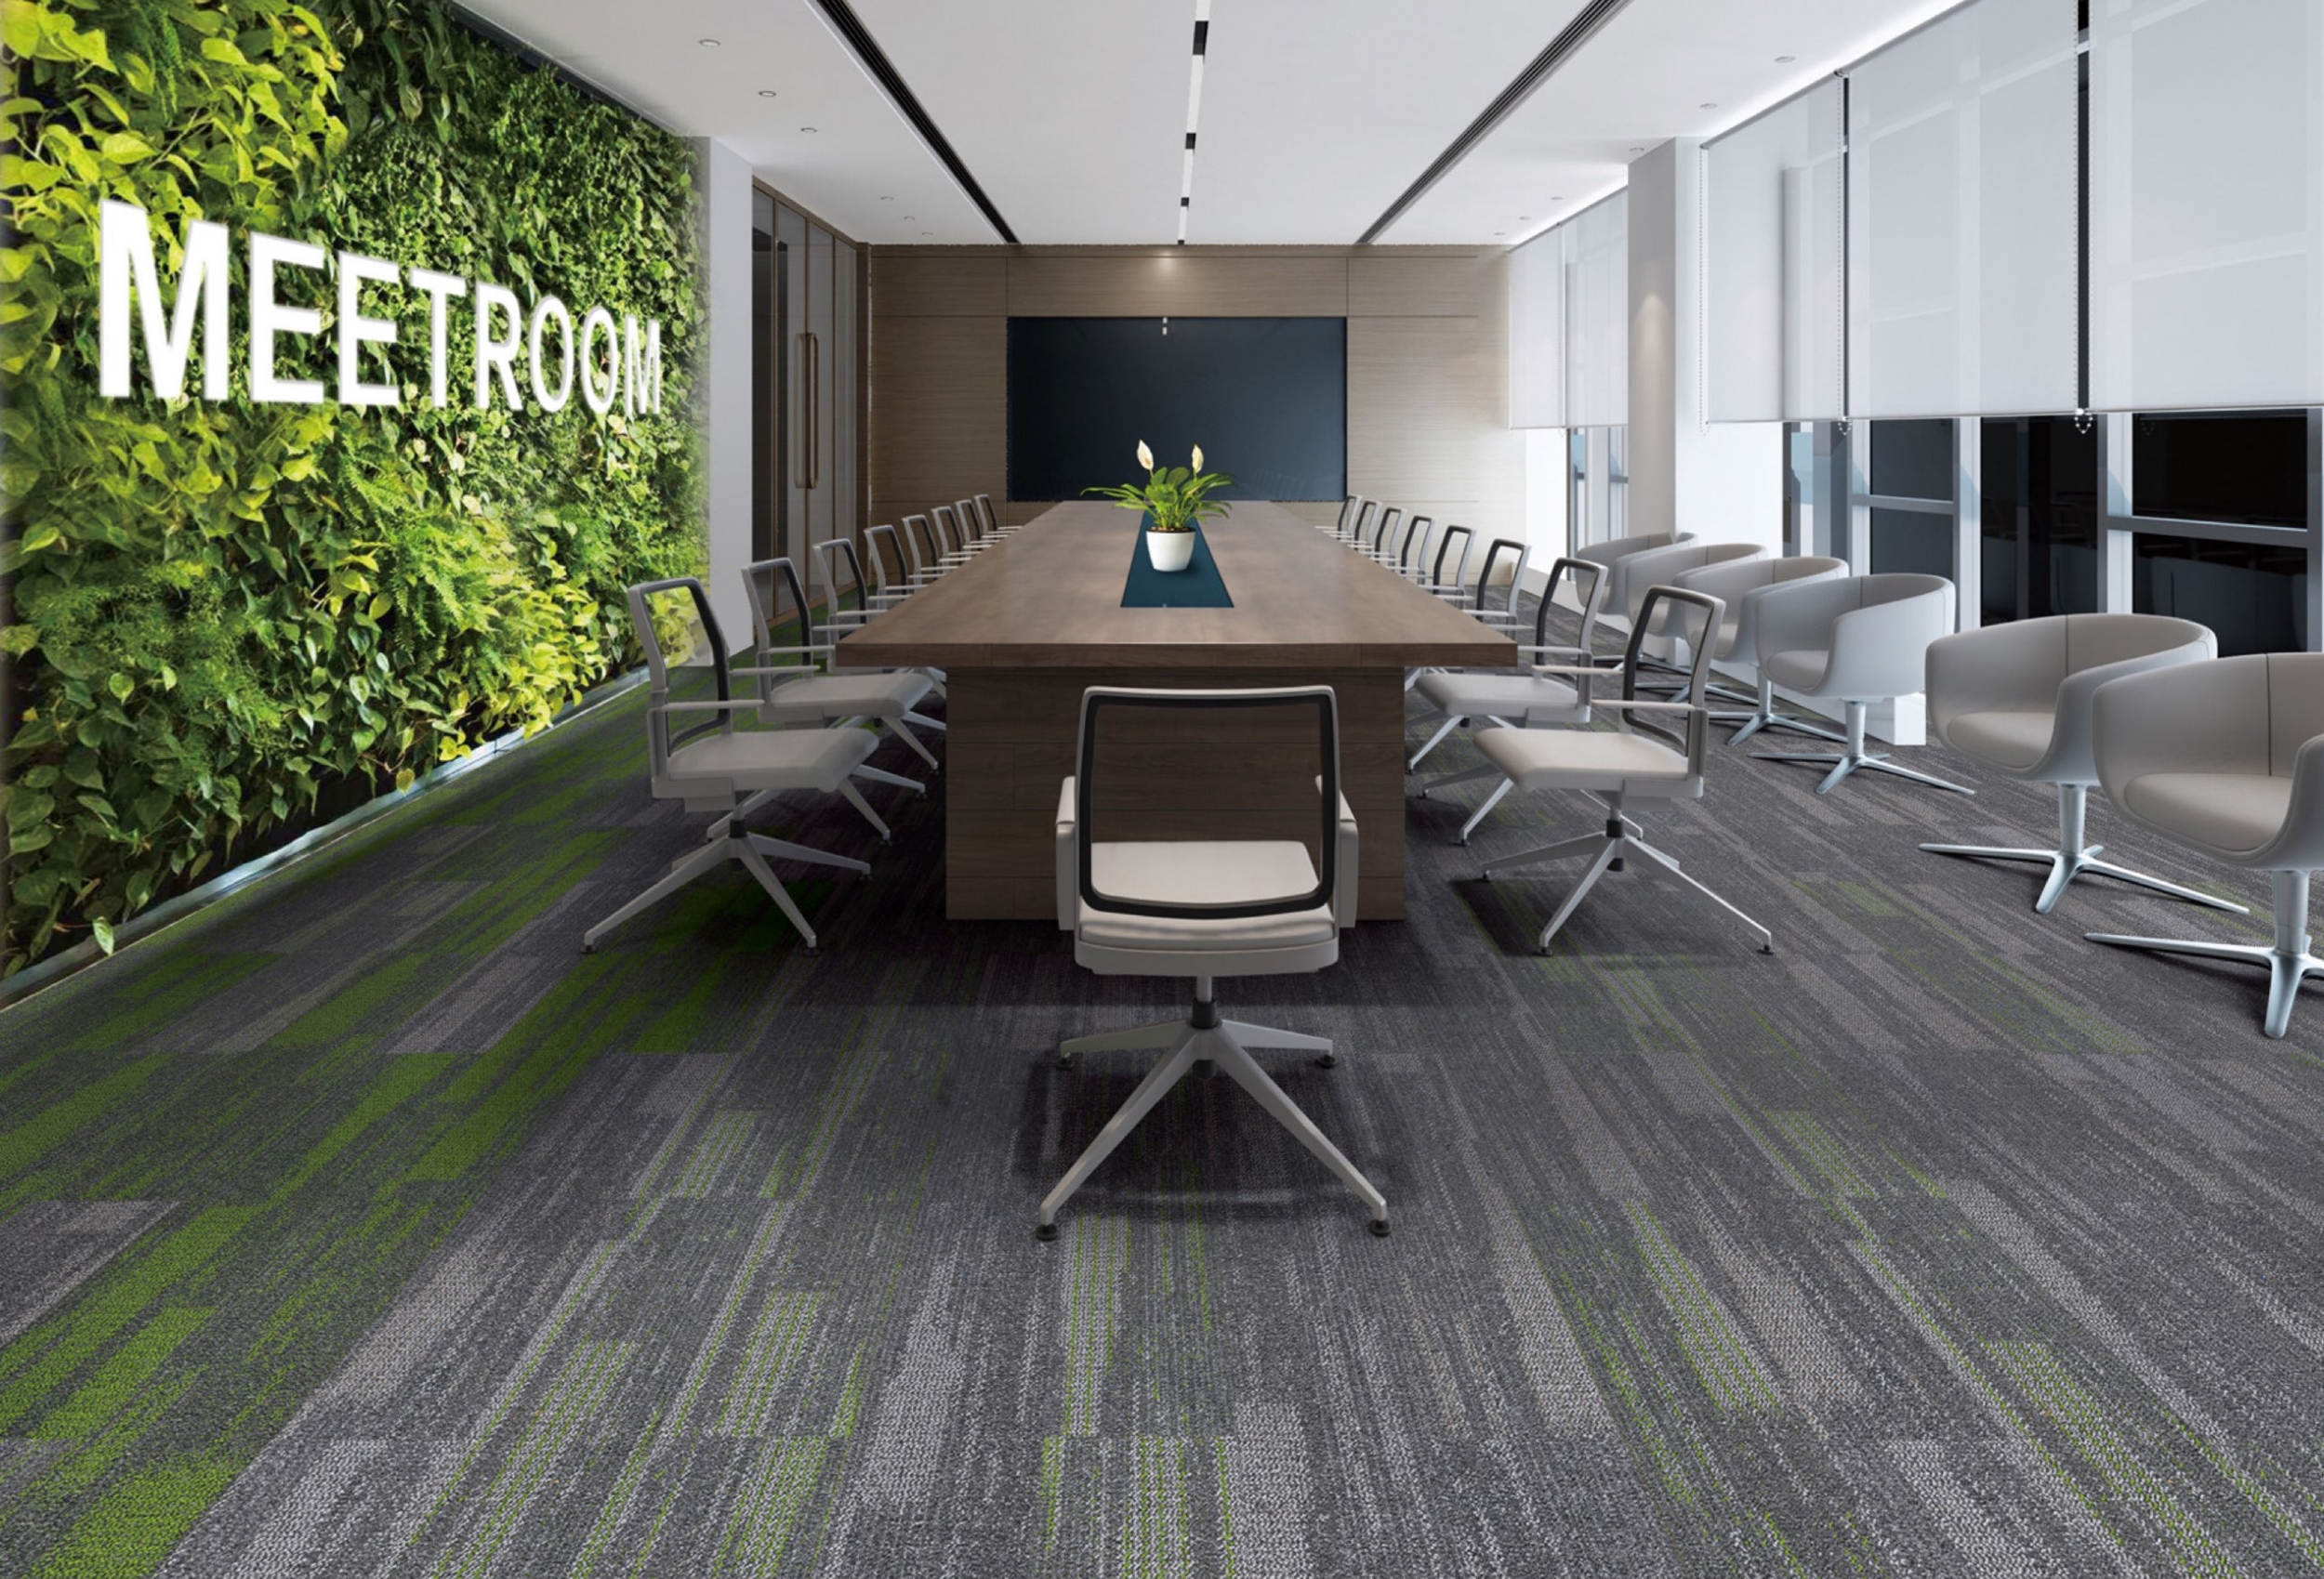 A 3D rendering of an office meeting room with carpet flooring